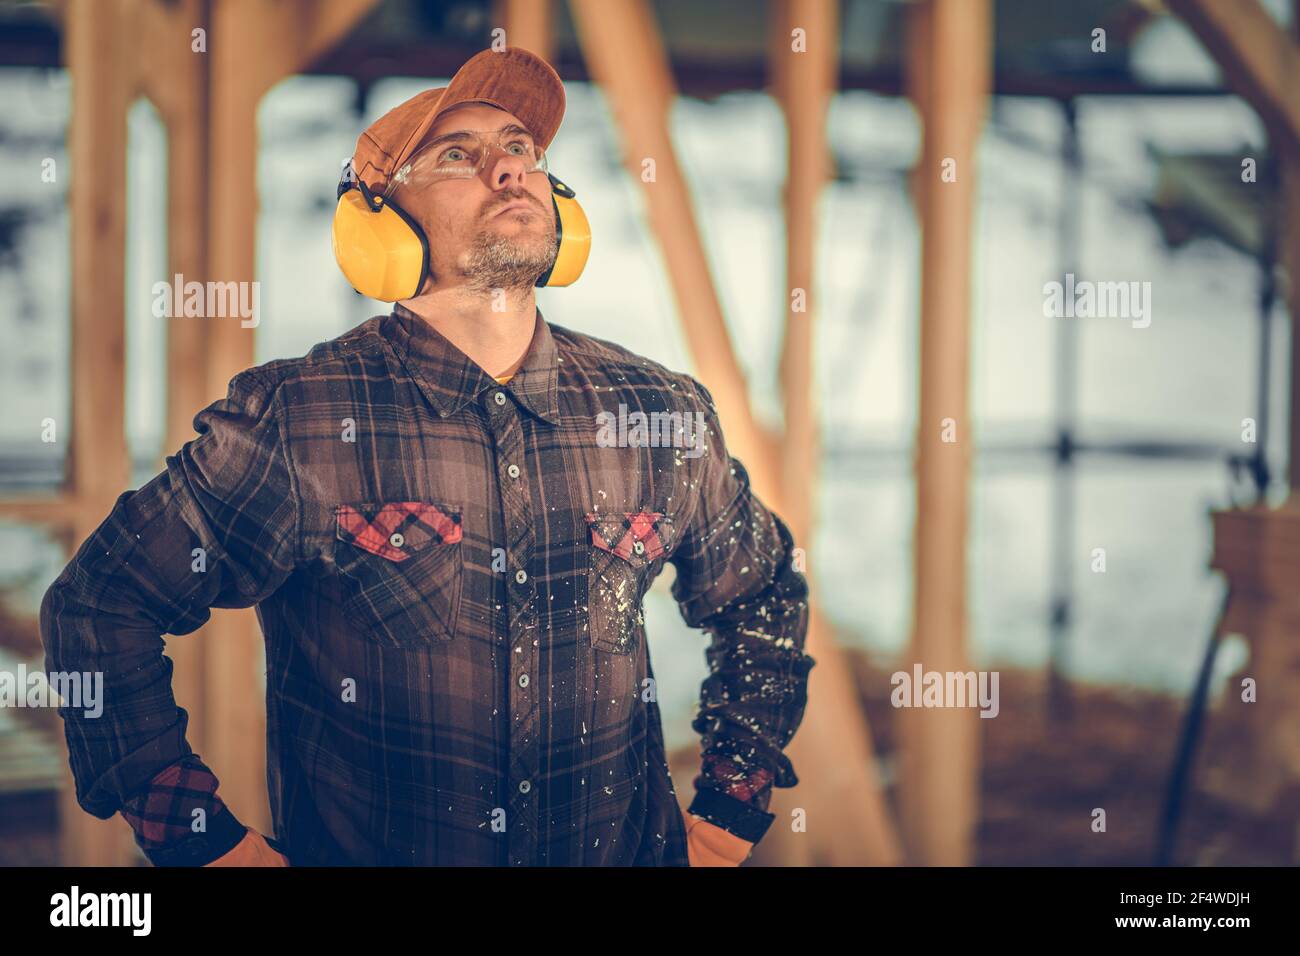 Construction Contractor in His 40s Wearing Noise Reduction Headphones and Eyes Protection Glasses Looking Up Inside Construction Zone. Stock Photo